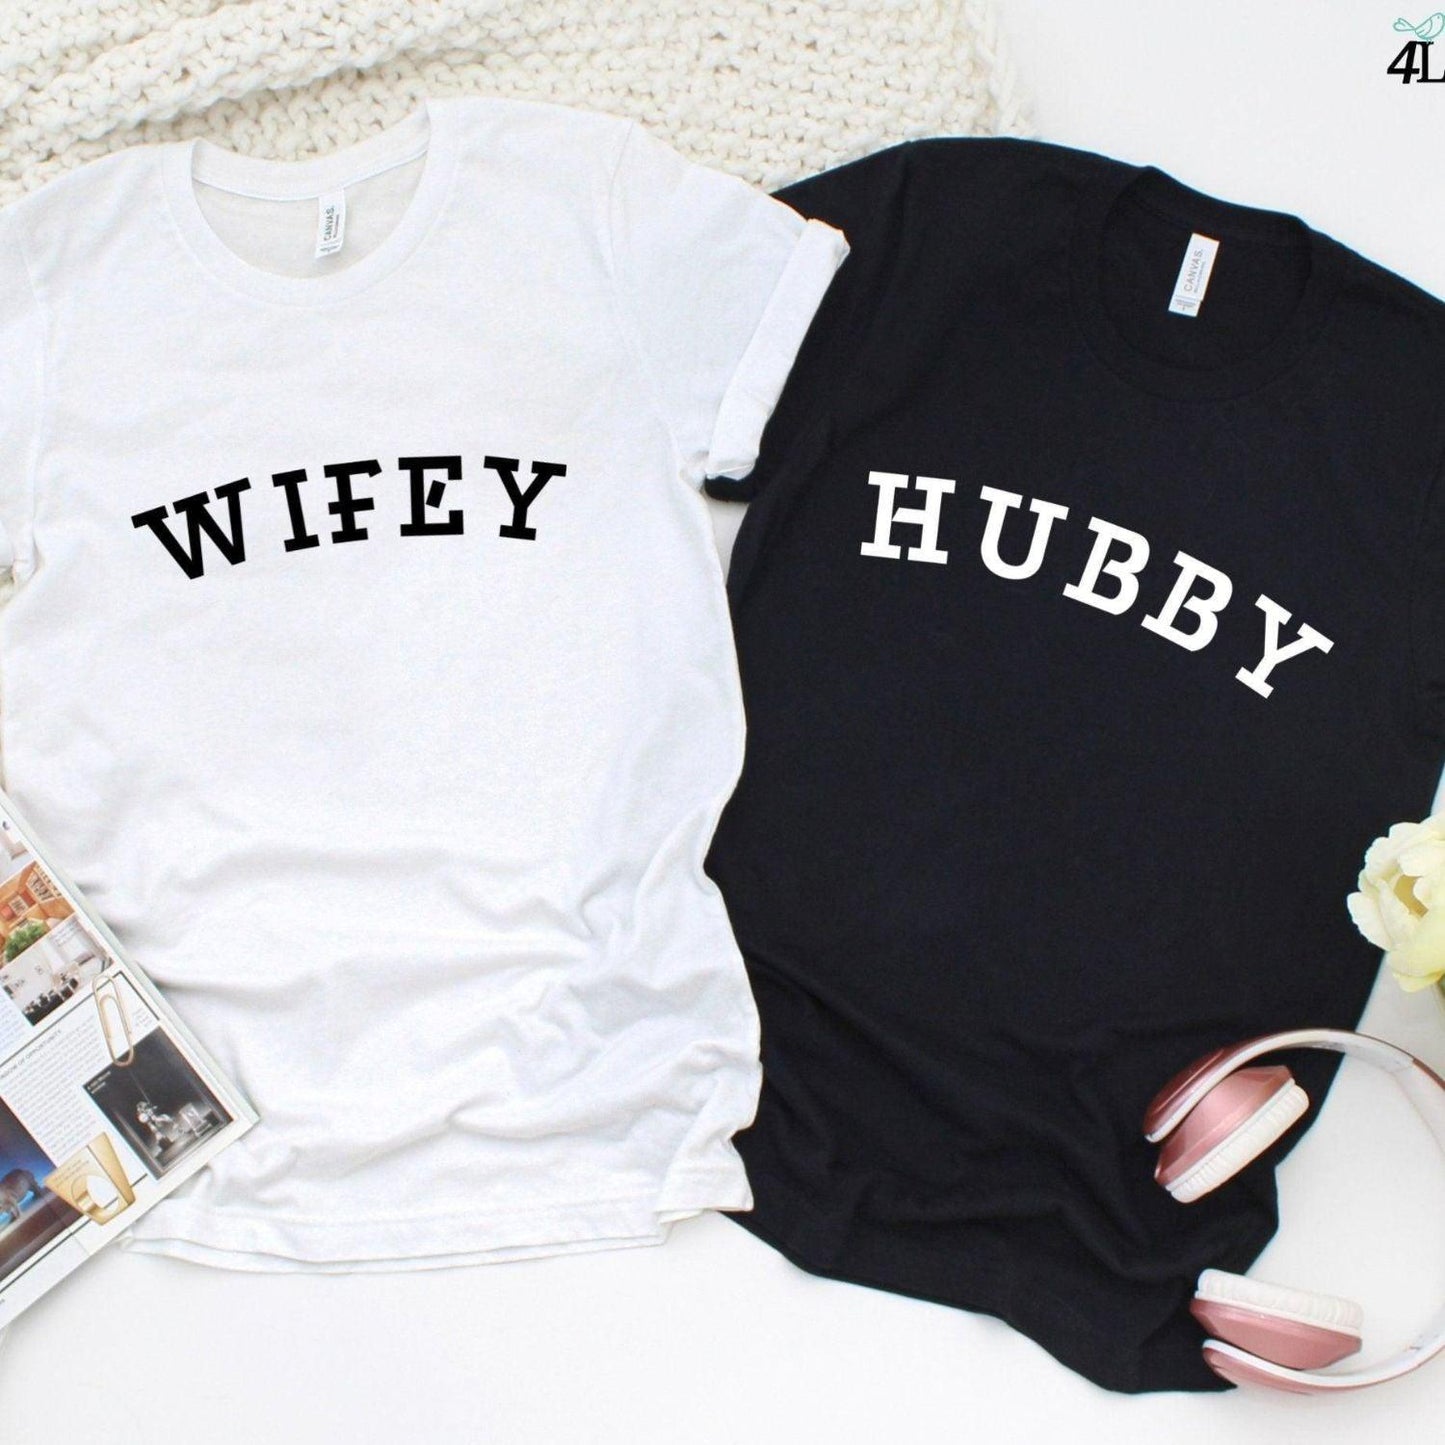 Hubby & Wifey Matching Sets: Ideal for Engagements, Weddings, Bachelorette & Honeymoon! - 4Lovebirds